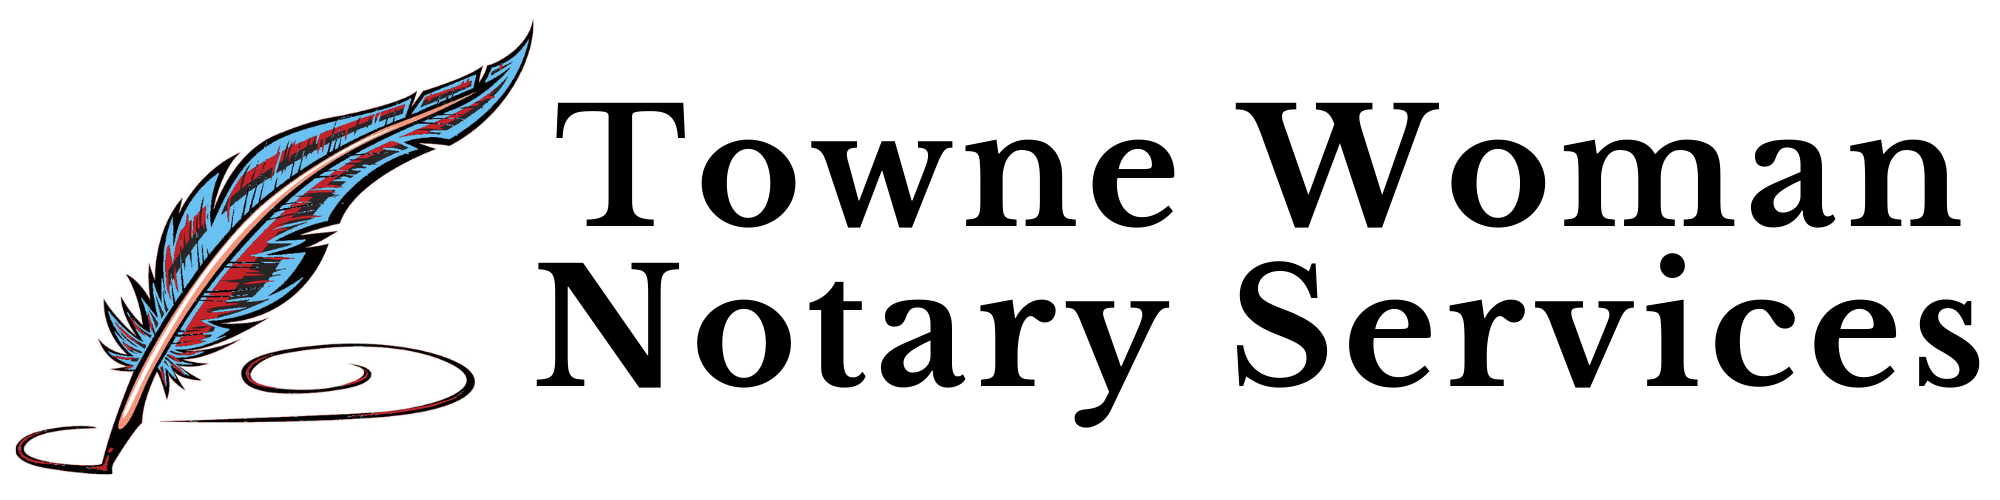 Towne Woman Notary Services